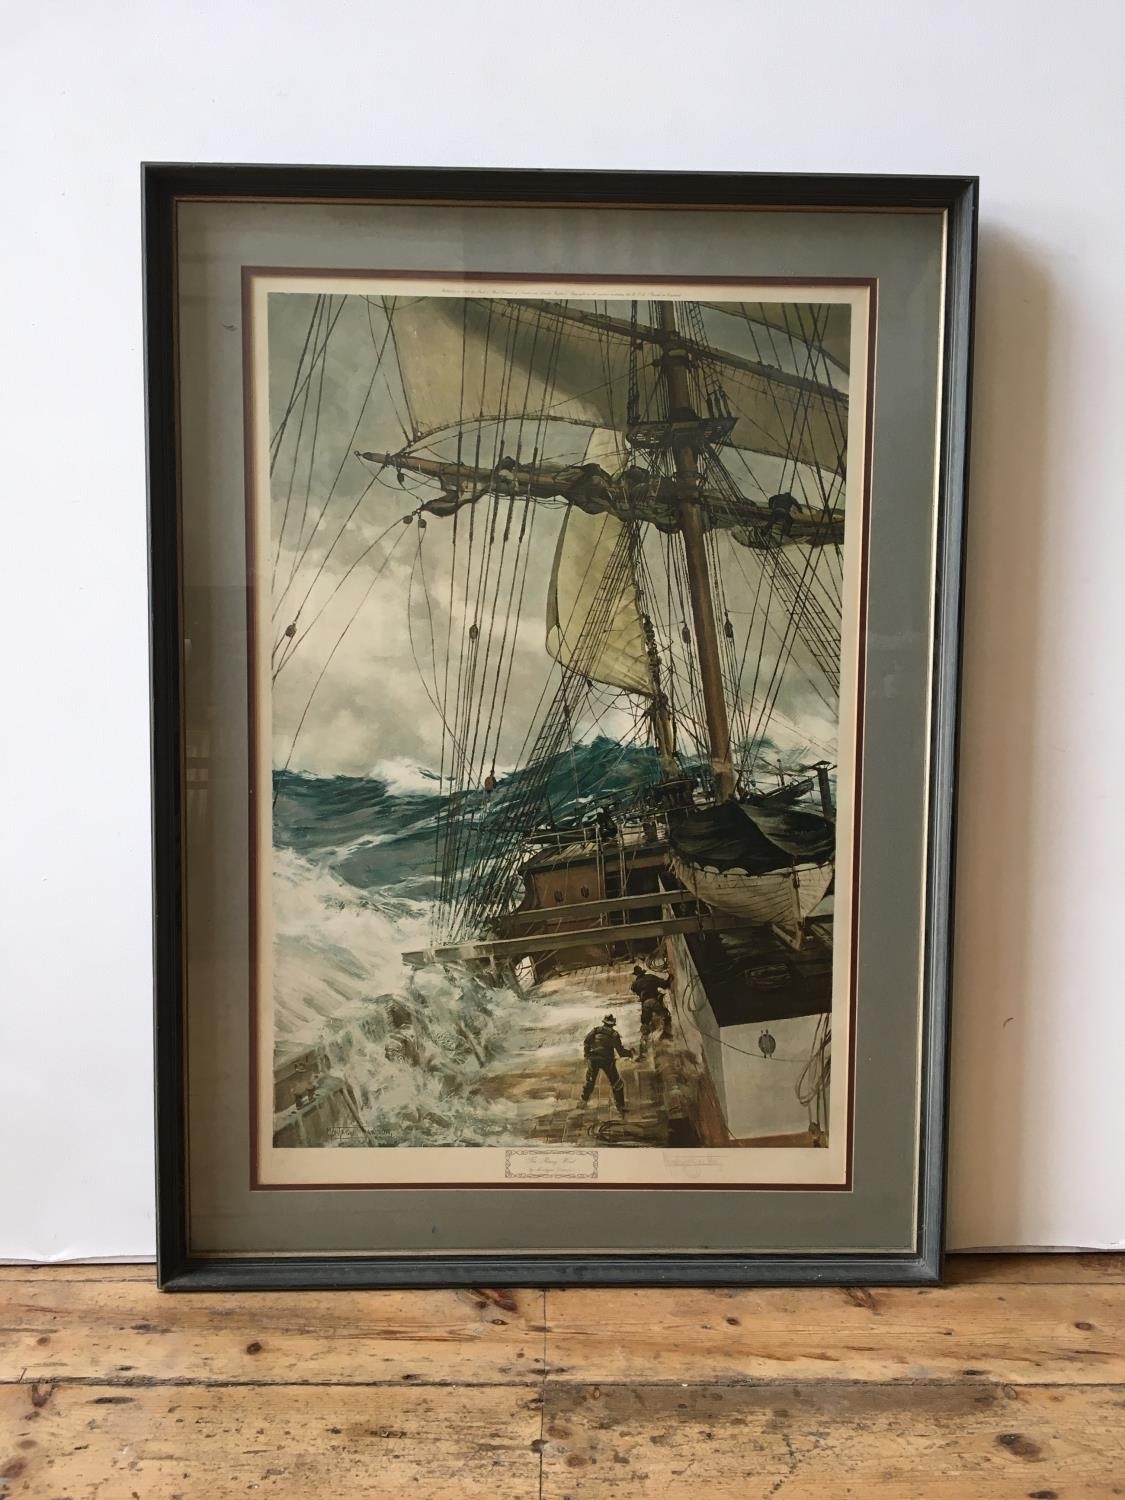 A SIGNED FRAMED PRINT BY MONTAGUE DAWSON TITLED THE RISING WIND 91CM HIGH X 61CM WIDE